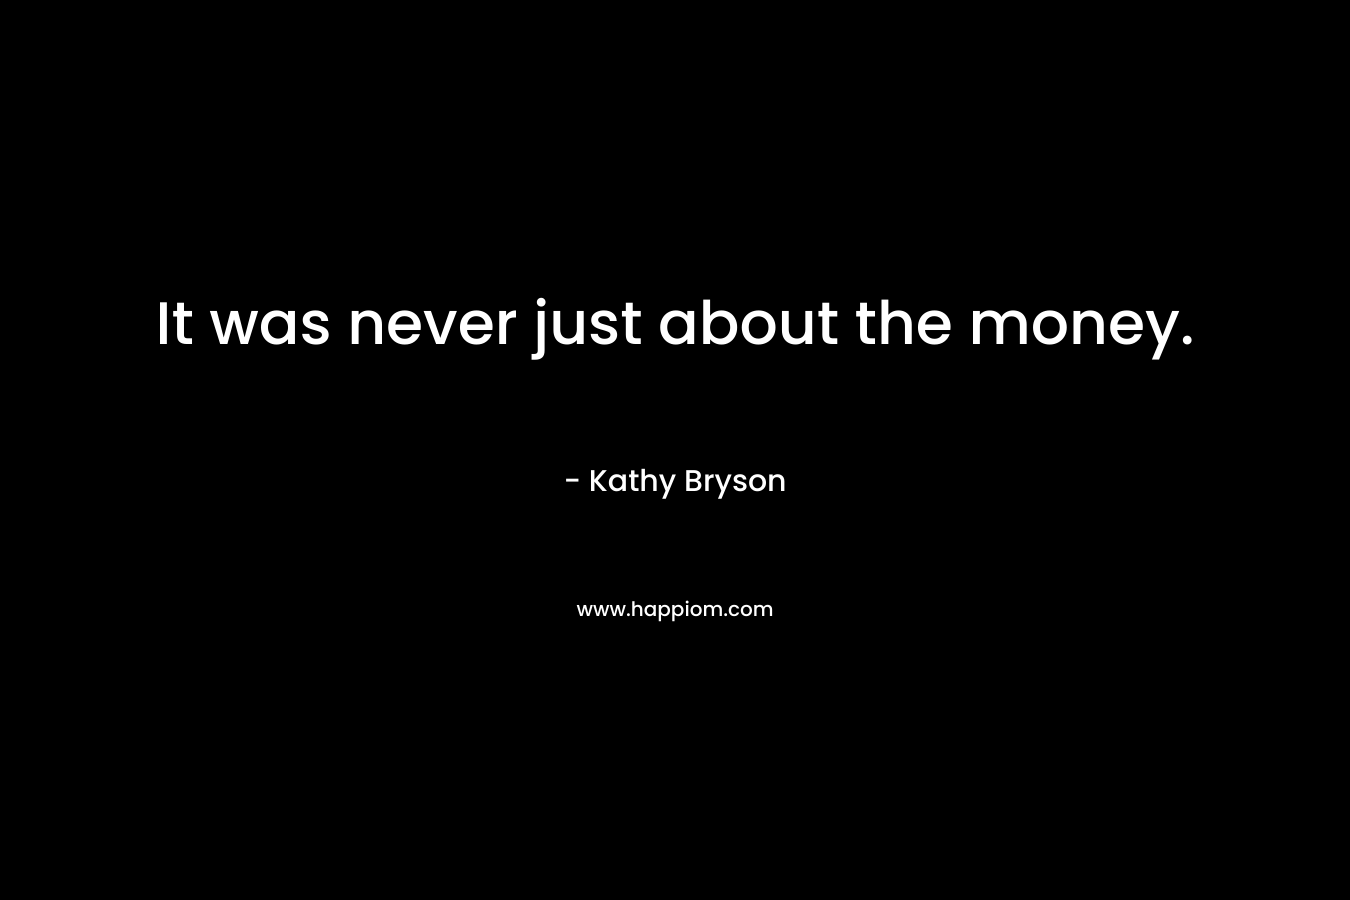 It was never just about the money.